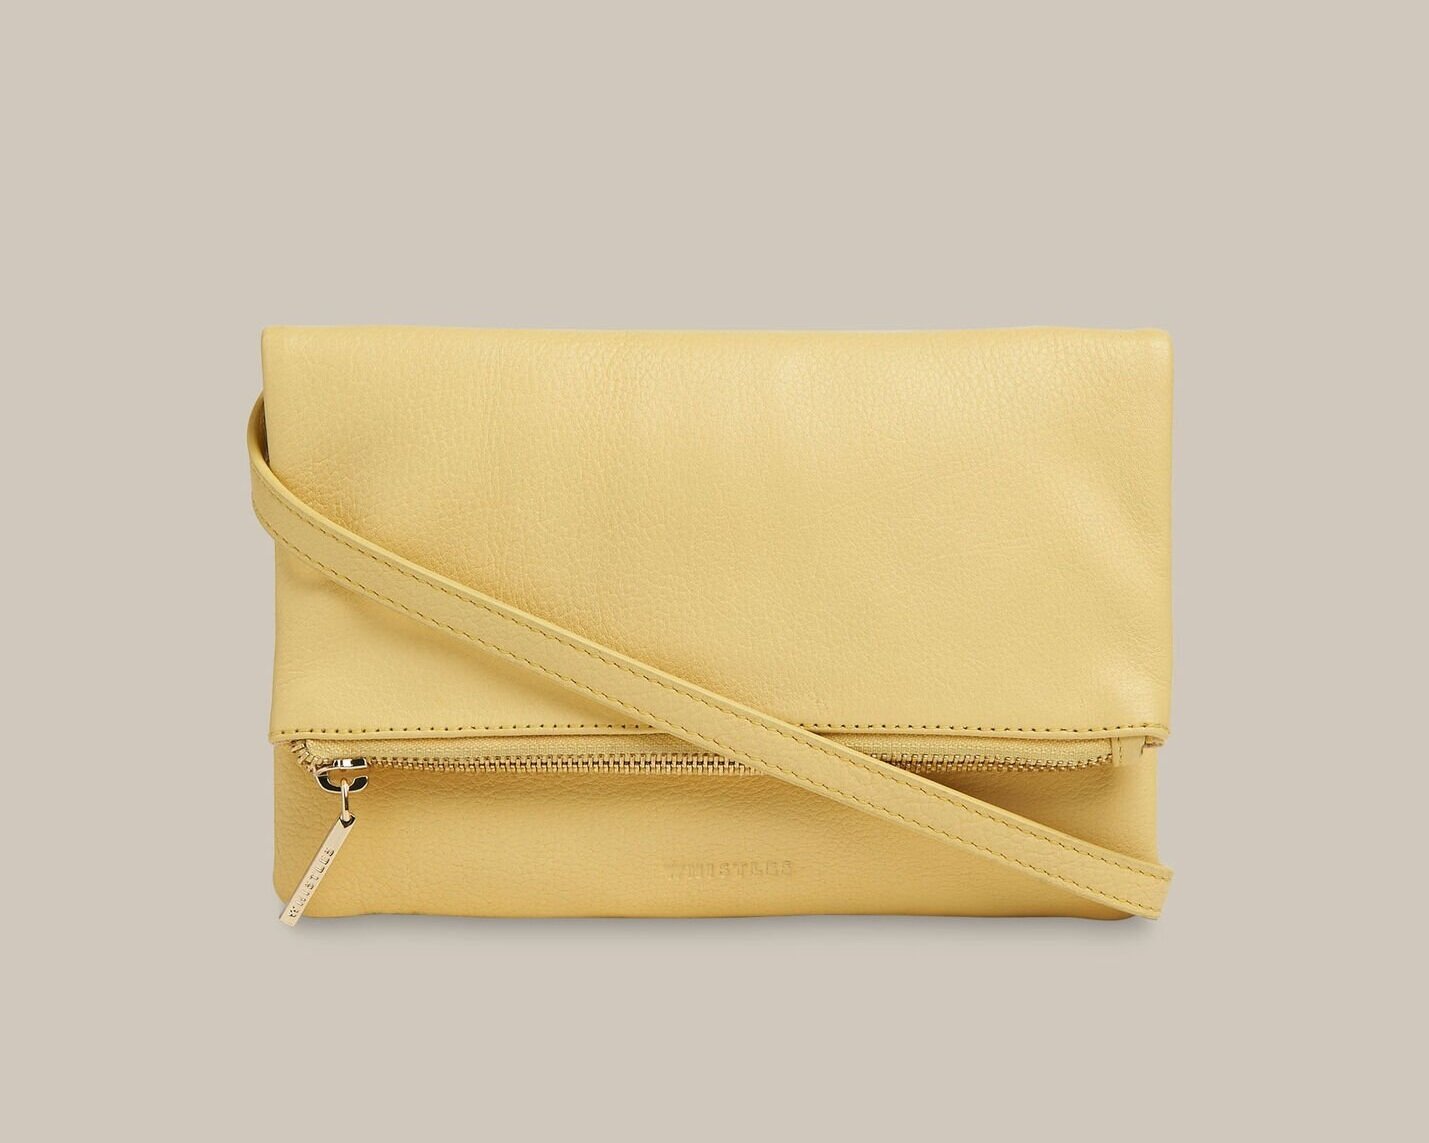 Whistles, Issy Mini Foldover Bag in Vibrant Yellow